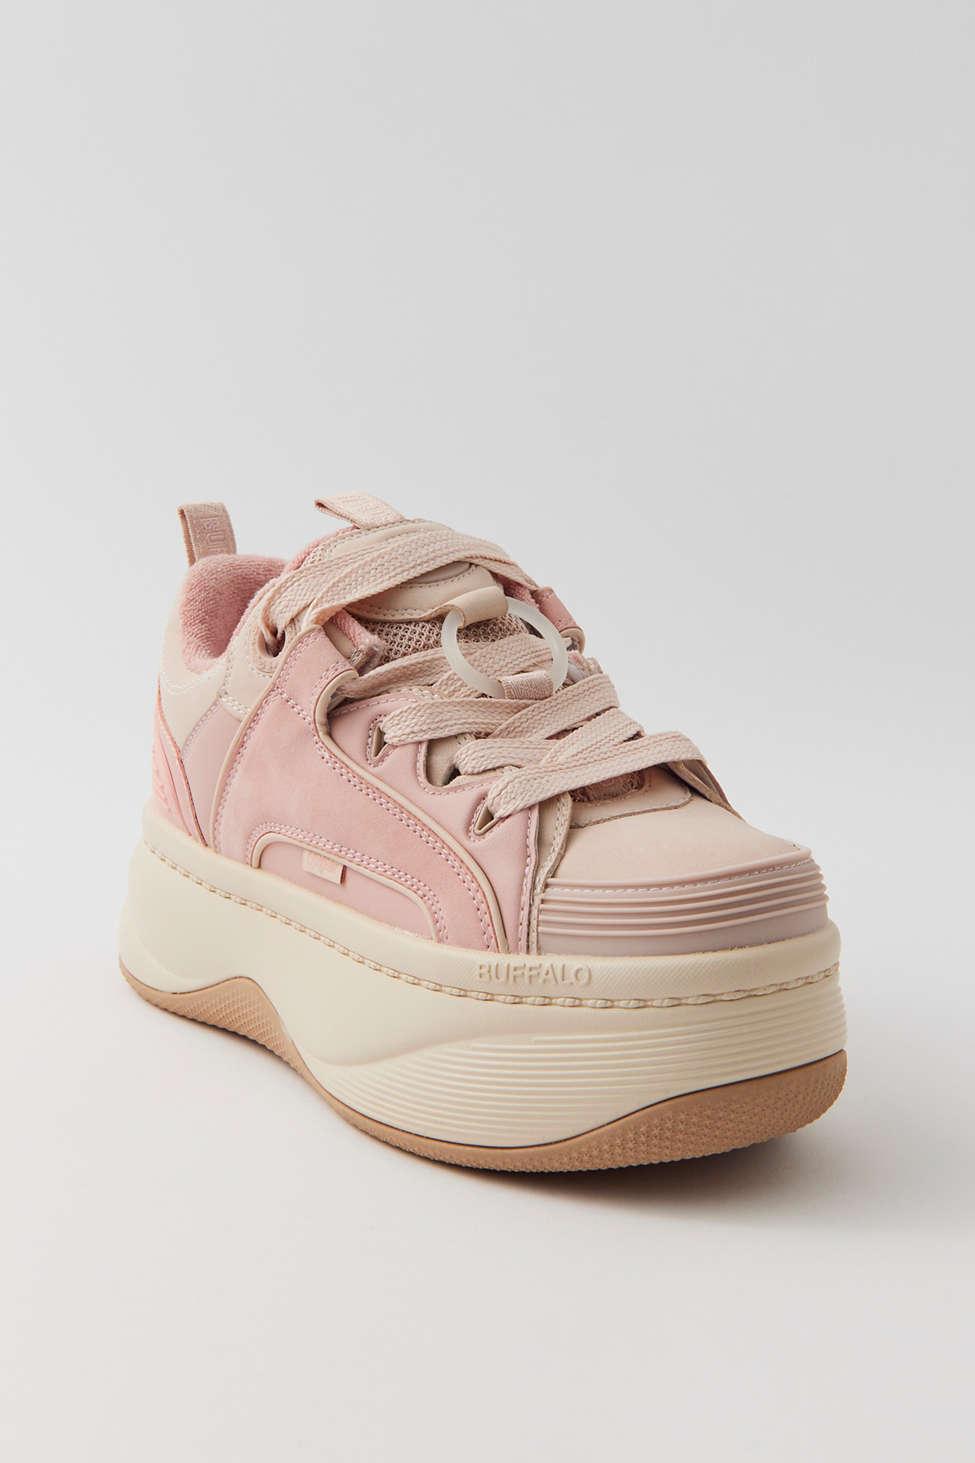 Buffalo CLD Corin low platform sneakers in beige and pink | ASOS